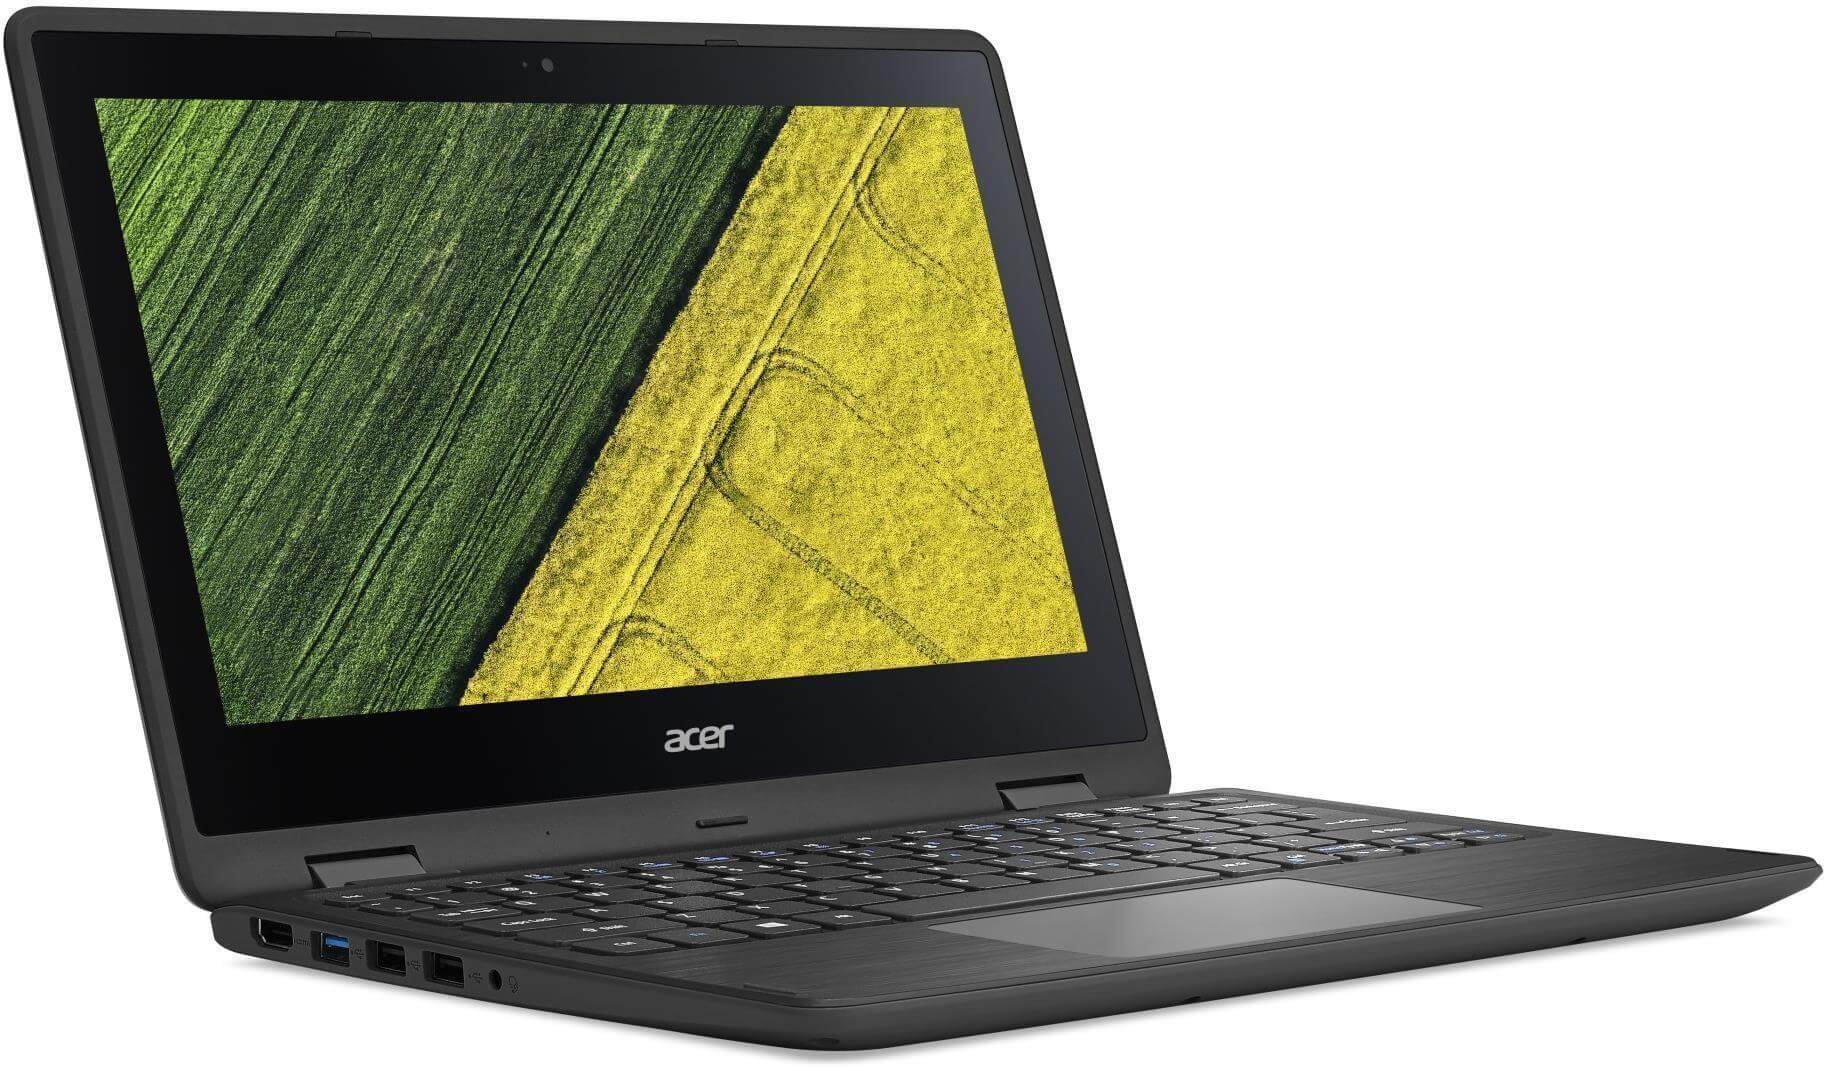 Acer spin sp111 32n. Acer Spin 1 sp111-32n. Acer Spin sp111 32. Acer Spin 1 SP 111-31. Acer 11.6" Spin 1.